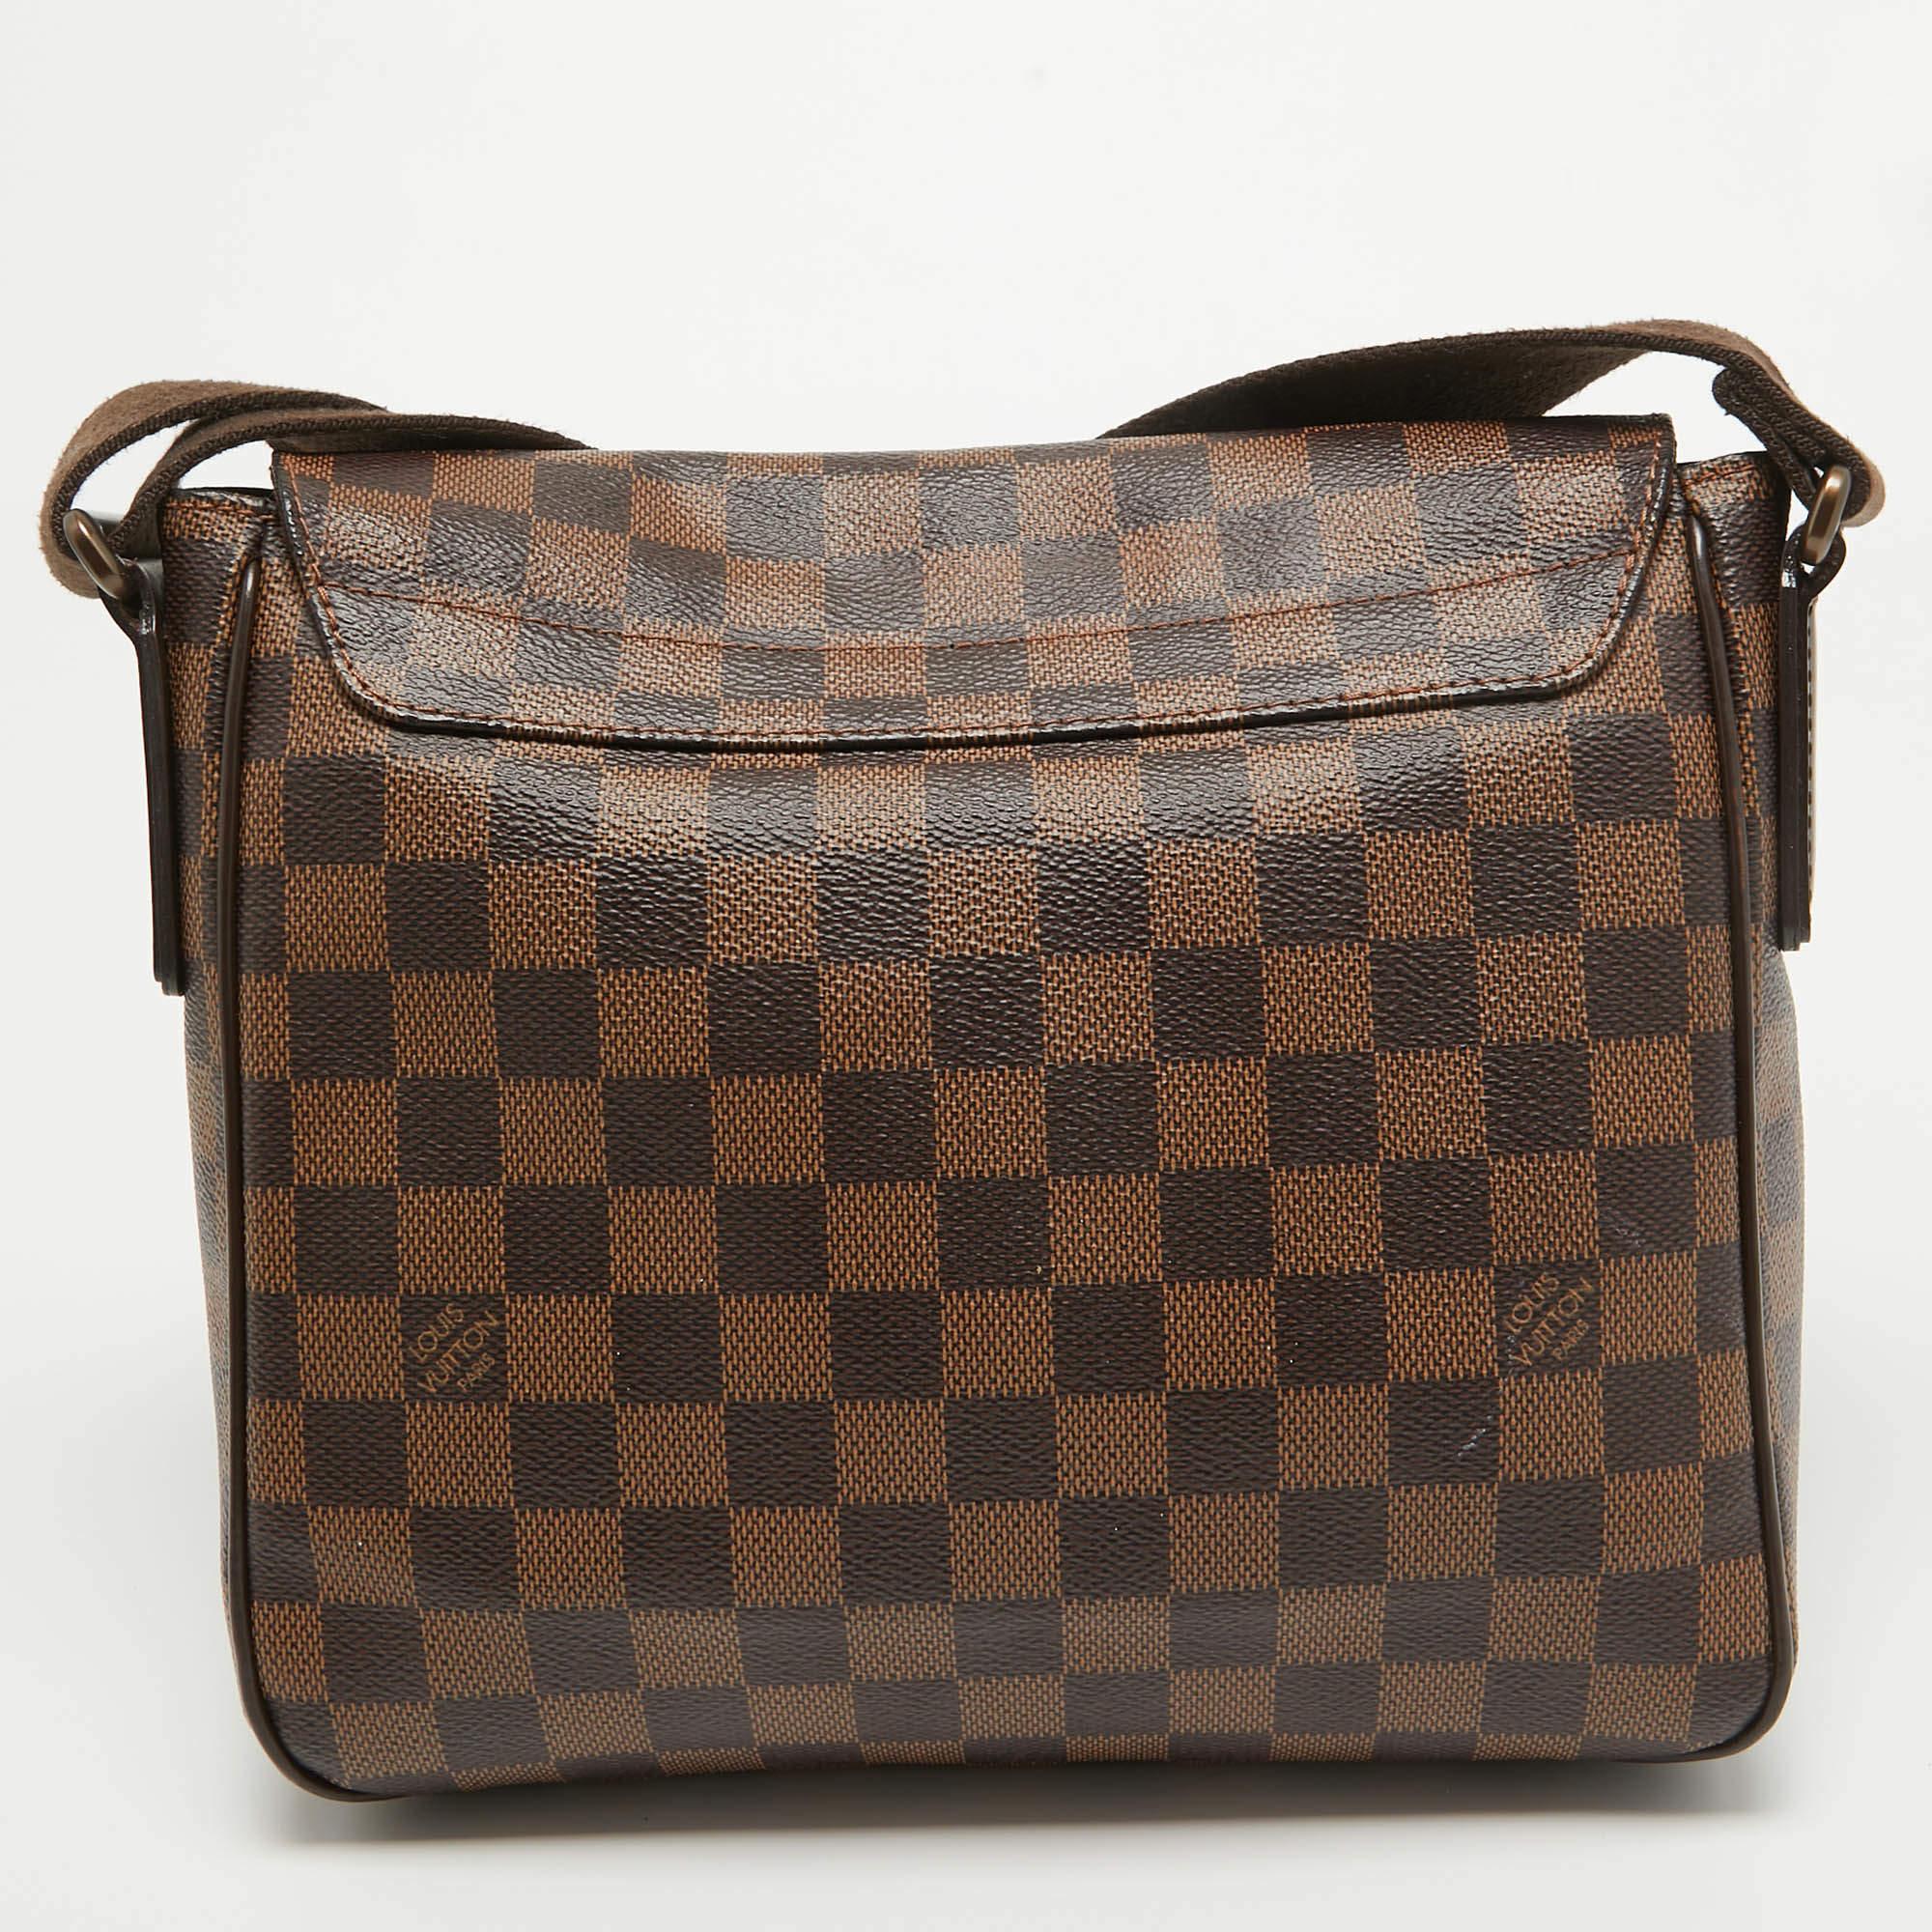 This District PM bag from the House of Louis Vuitton brings you endless style, comfort, and luxury. It is crafted using Damier Ebene canvas and displays brass-tone hardware, a canvas-lined interior, and leather trims. Its shape is complemented with